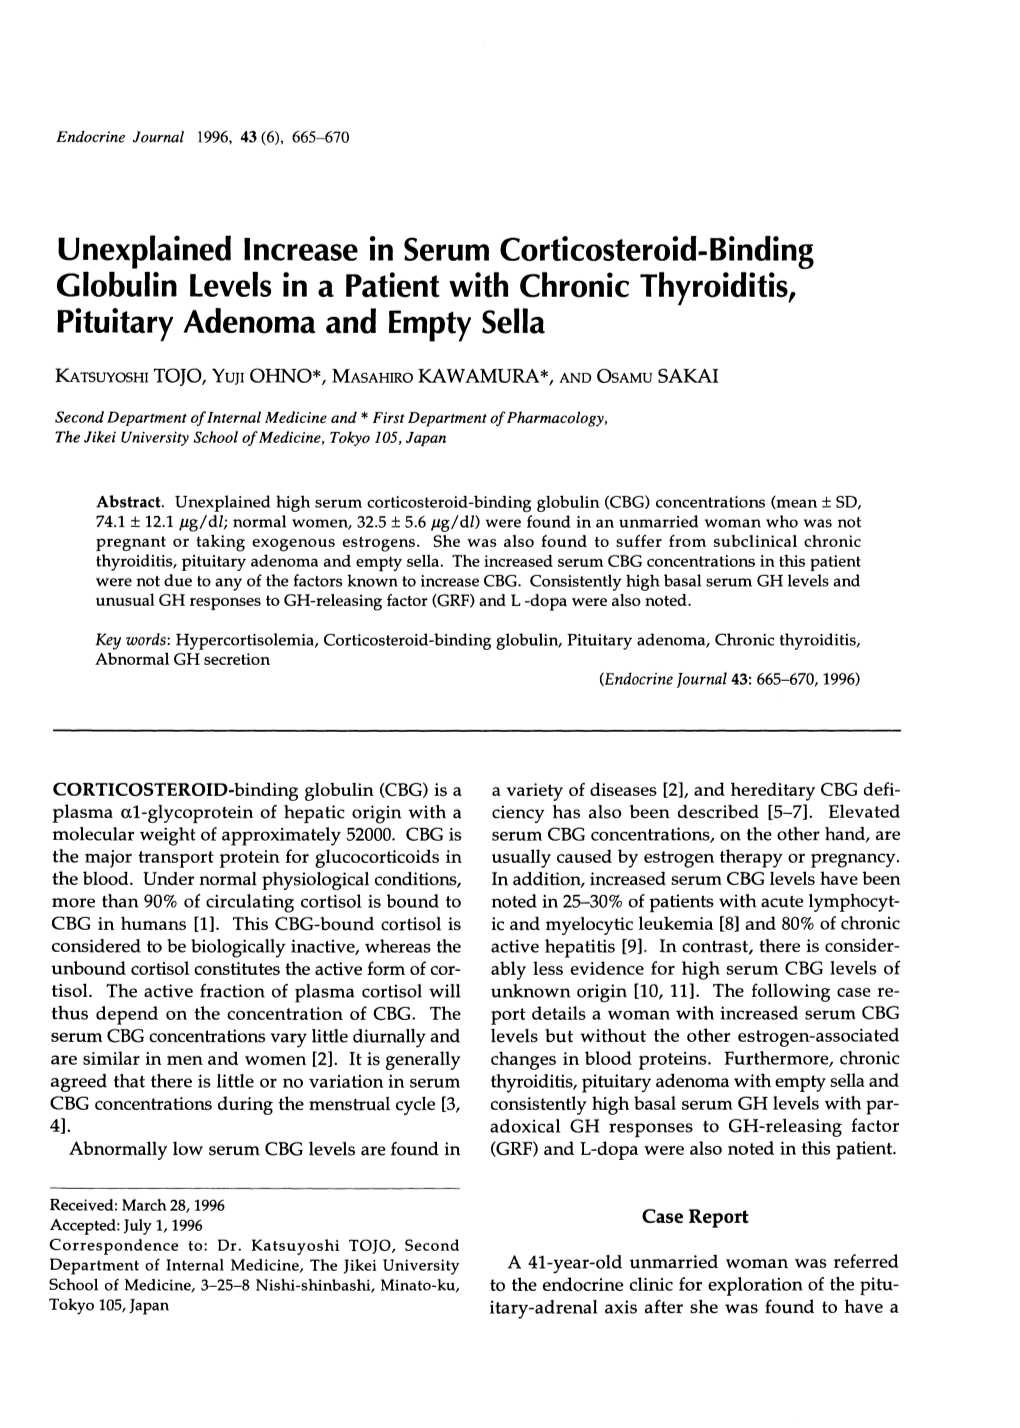 Unexplained Increase in Serum Corticosteroid-B Globulin Levels In